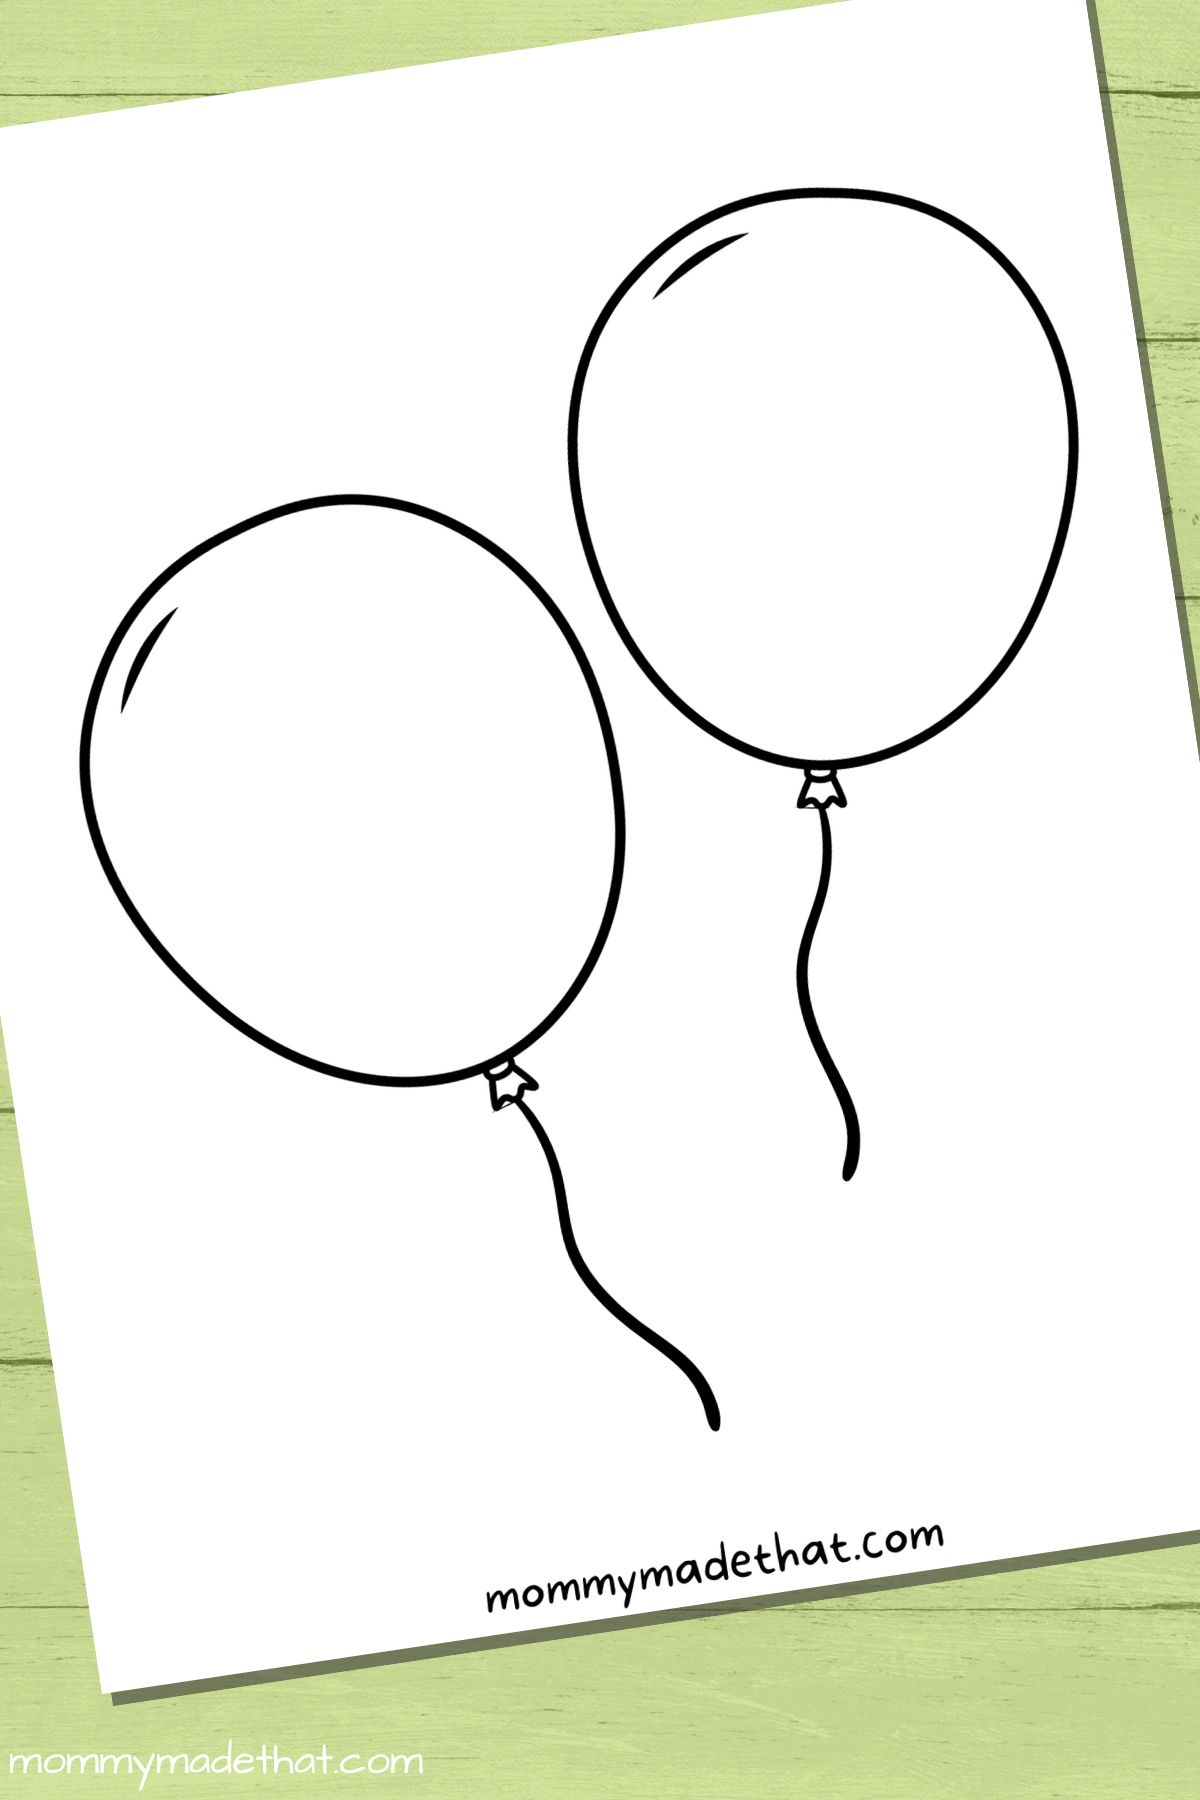 Printable Cut Out Balloon Template